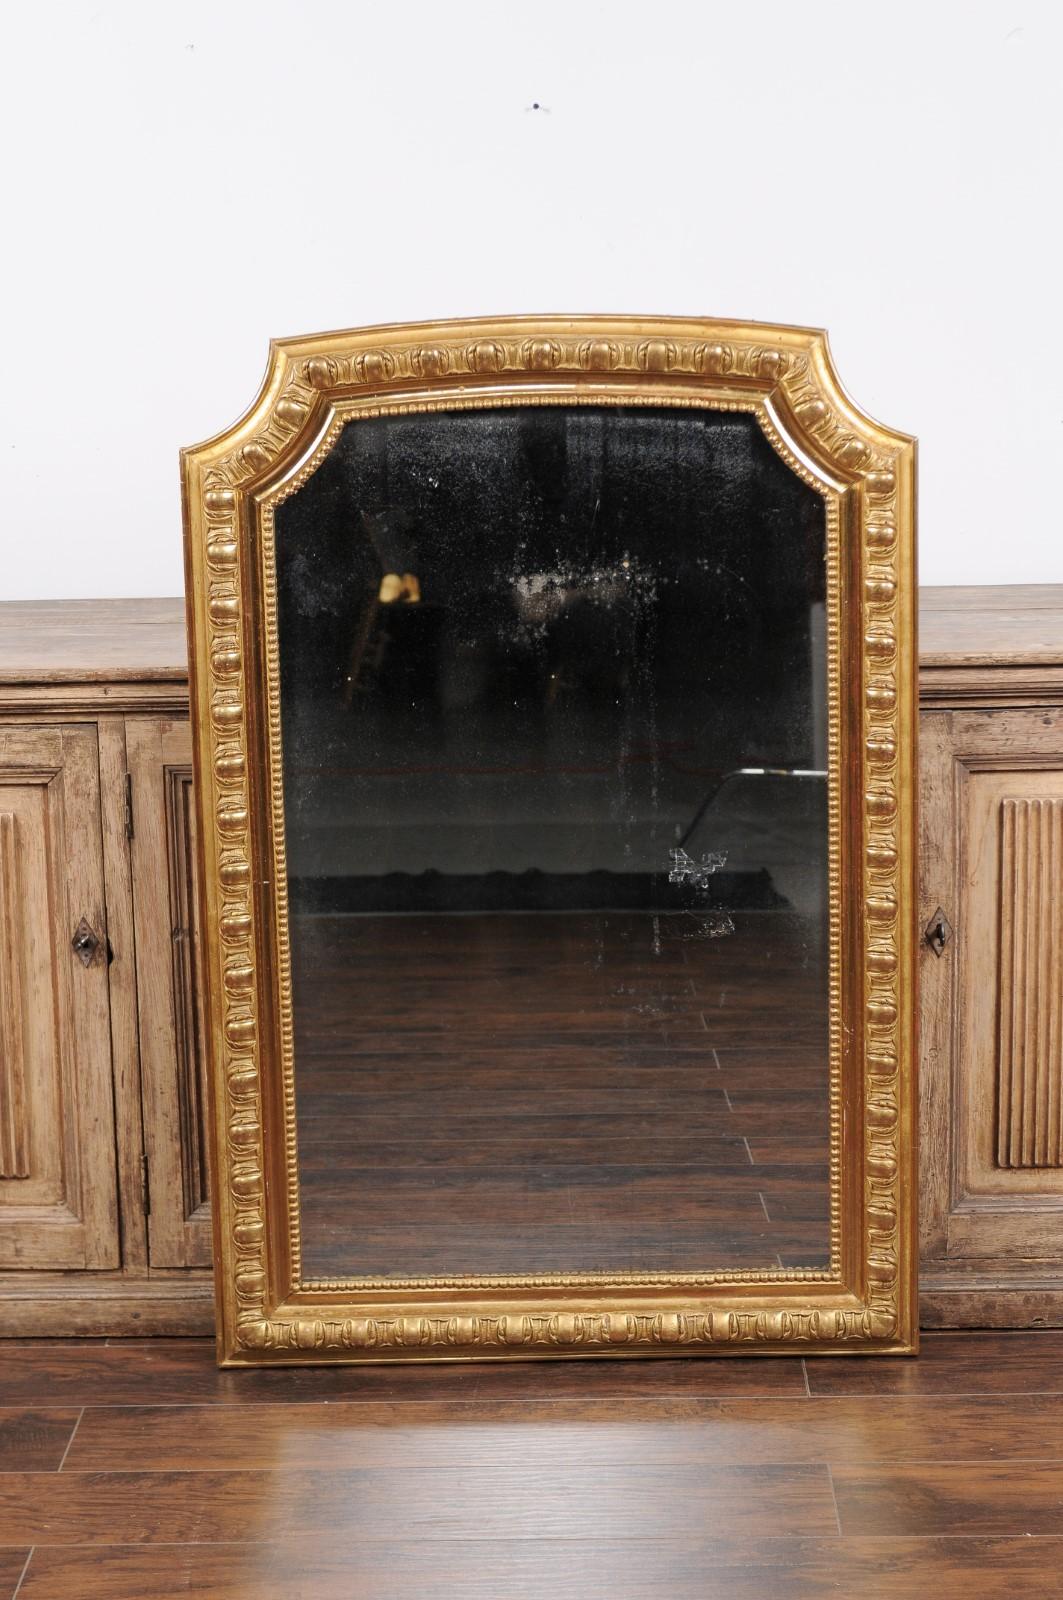 A French giltwood wall mirror from the early 20th century, with carved frame and beaded motifs. Born in France during the early years of the 20th century, this exquisite giltwood mirror features a rectangular silhouette, topped with curving sides.